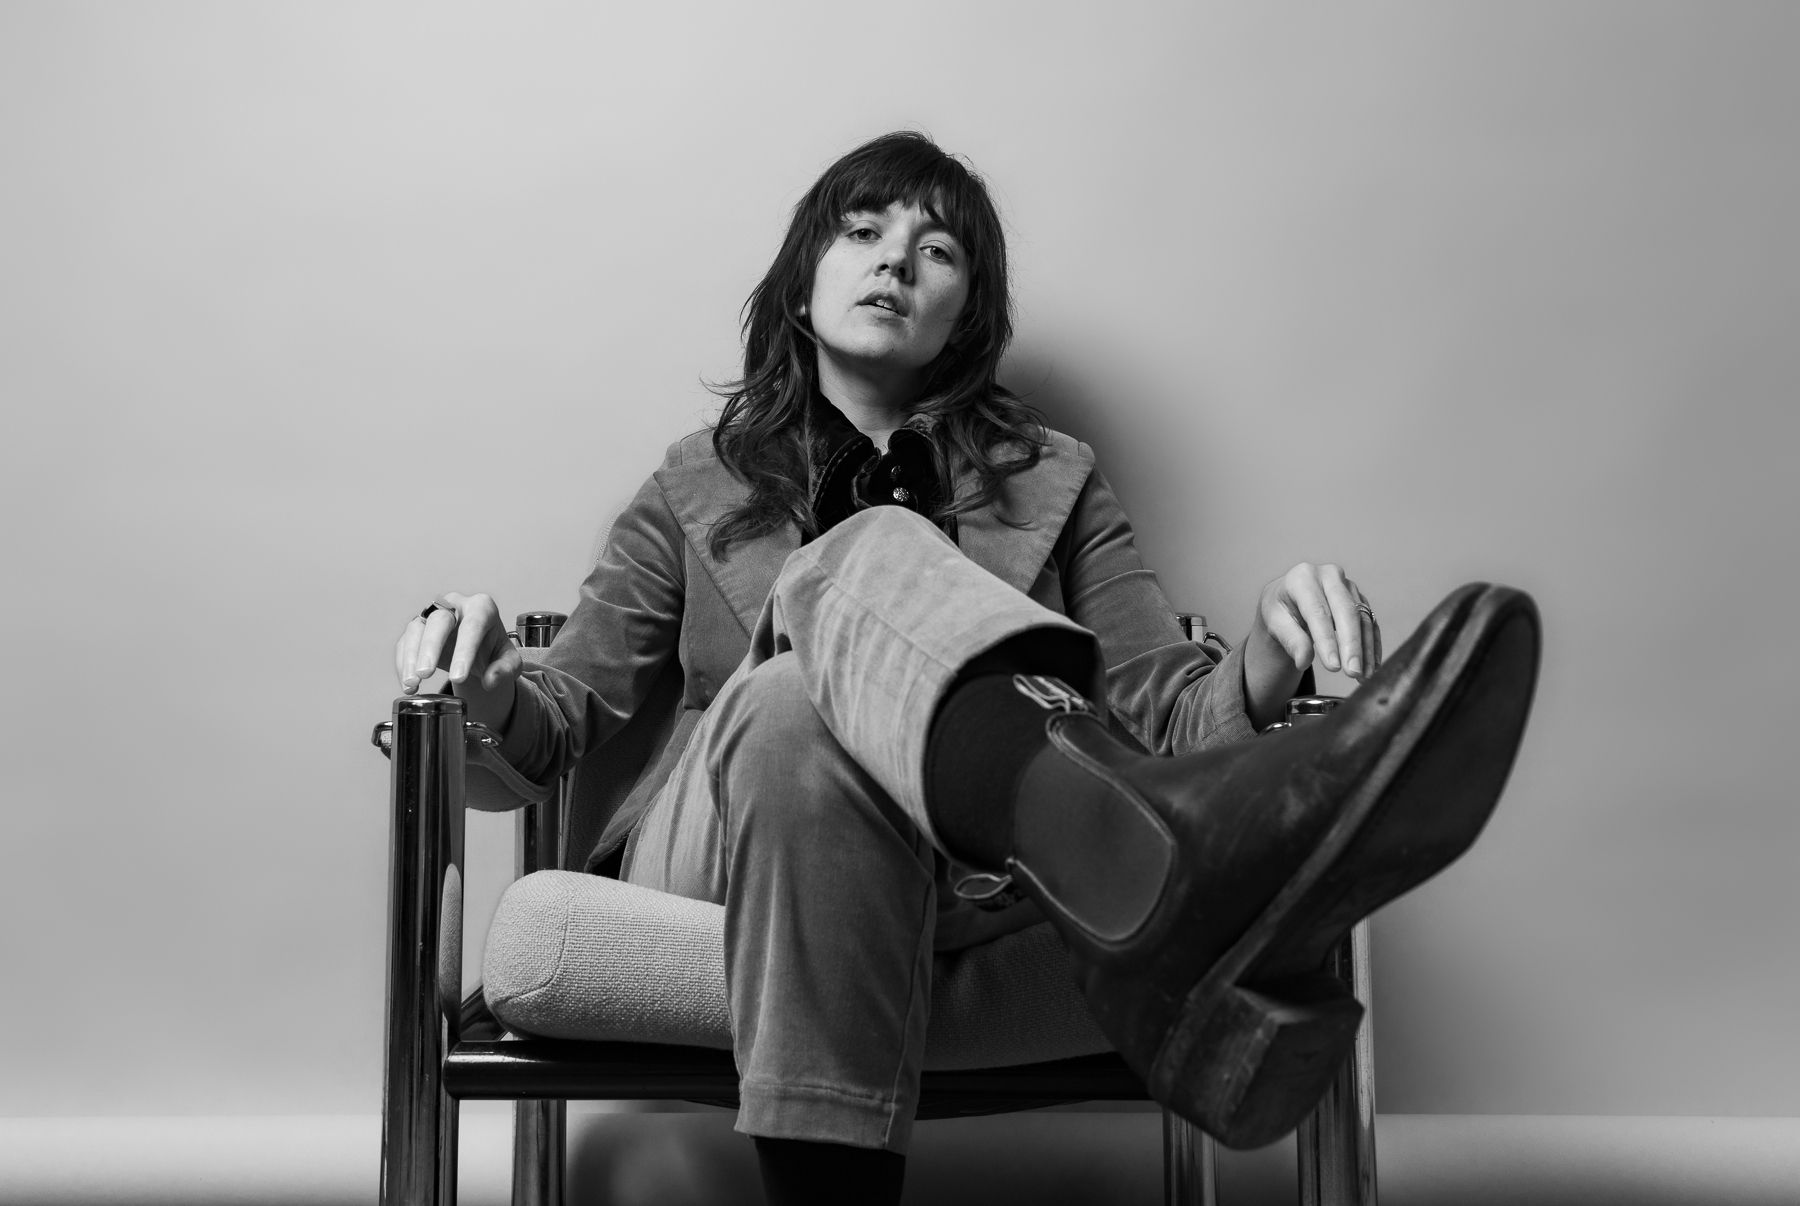 Courtney Barnett releases her most thoughtful and devastatingly honest album to date